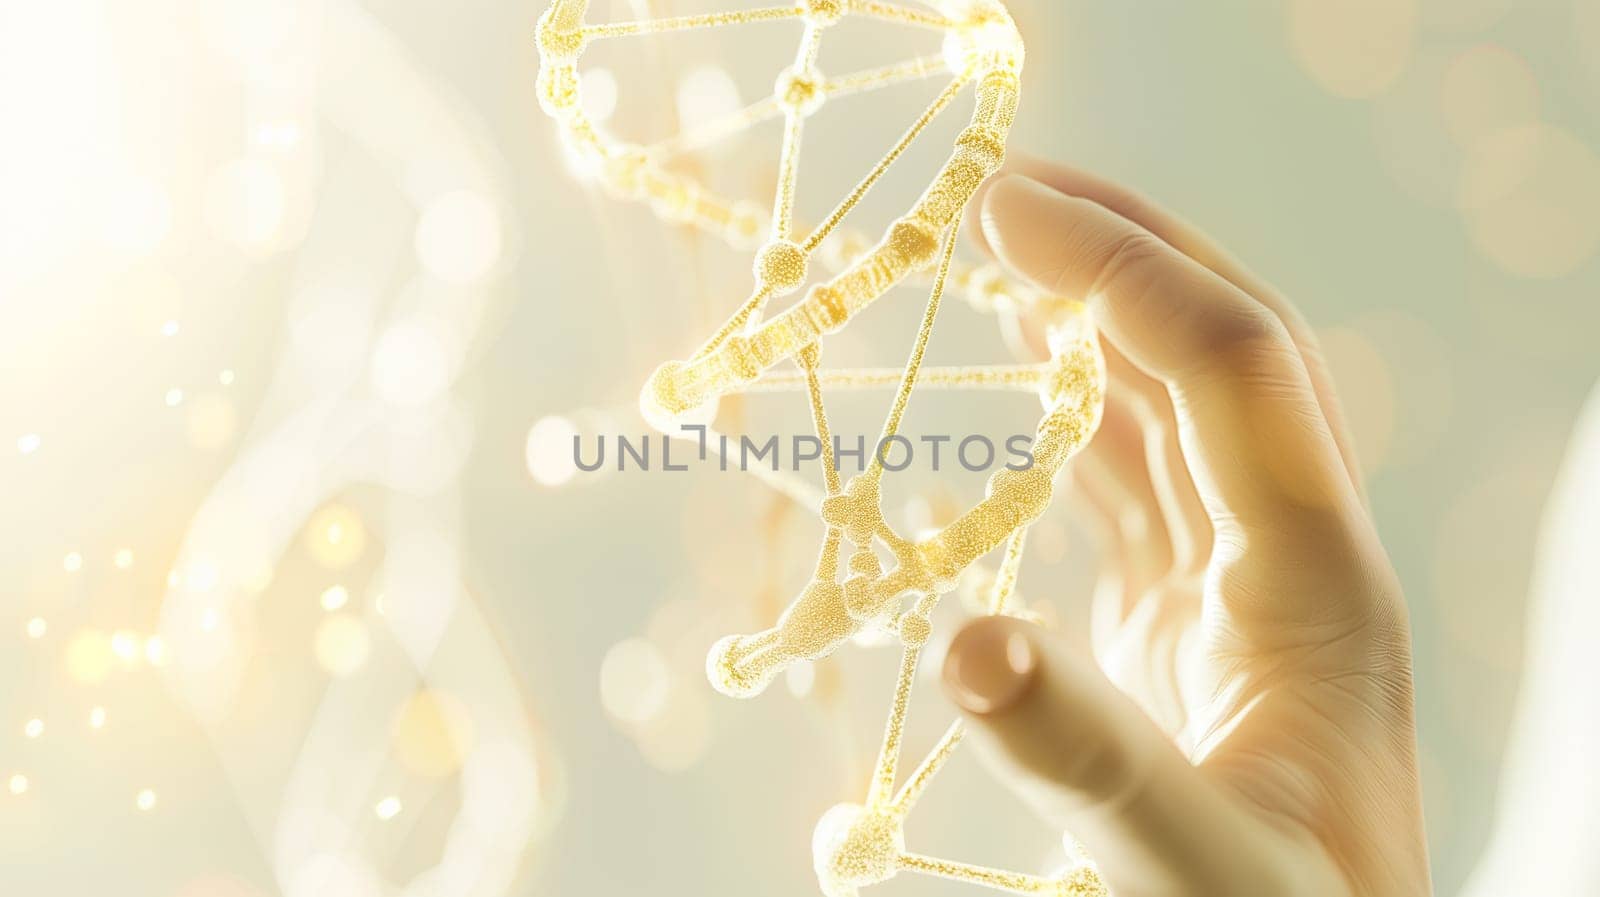 Doctor touch touch presenting DNA molecule research on the white background concept, Creation technologies for connection Mixed media,blurred background using digital network connection 3D rendering